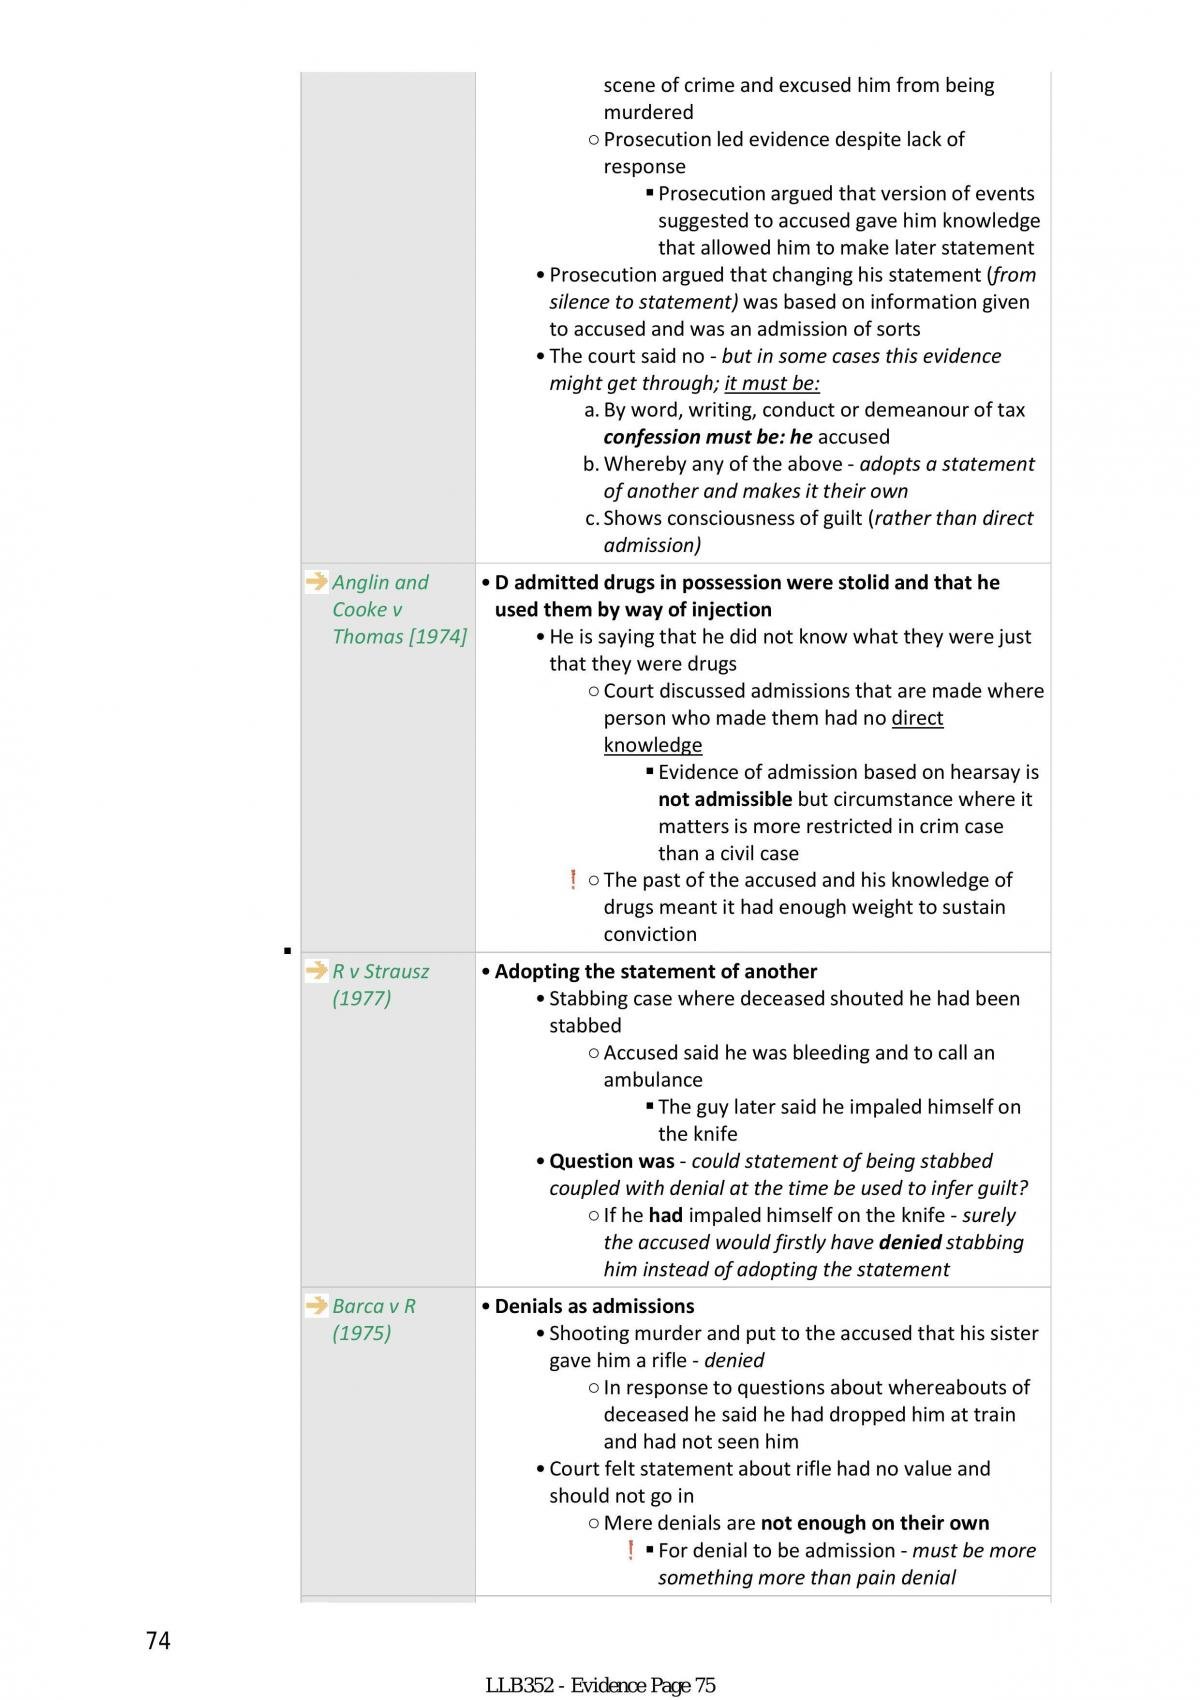 Complete Evidence Notes  - Page 75